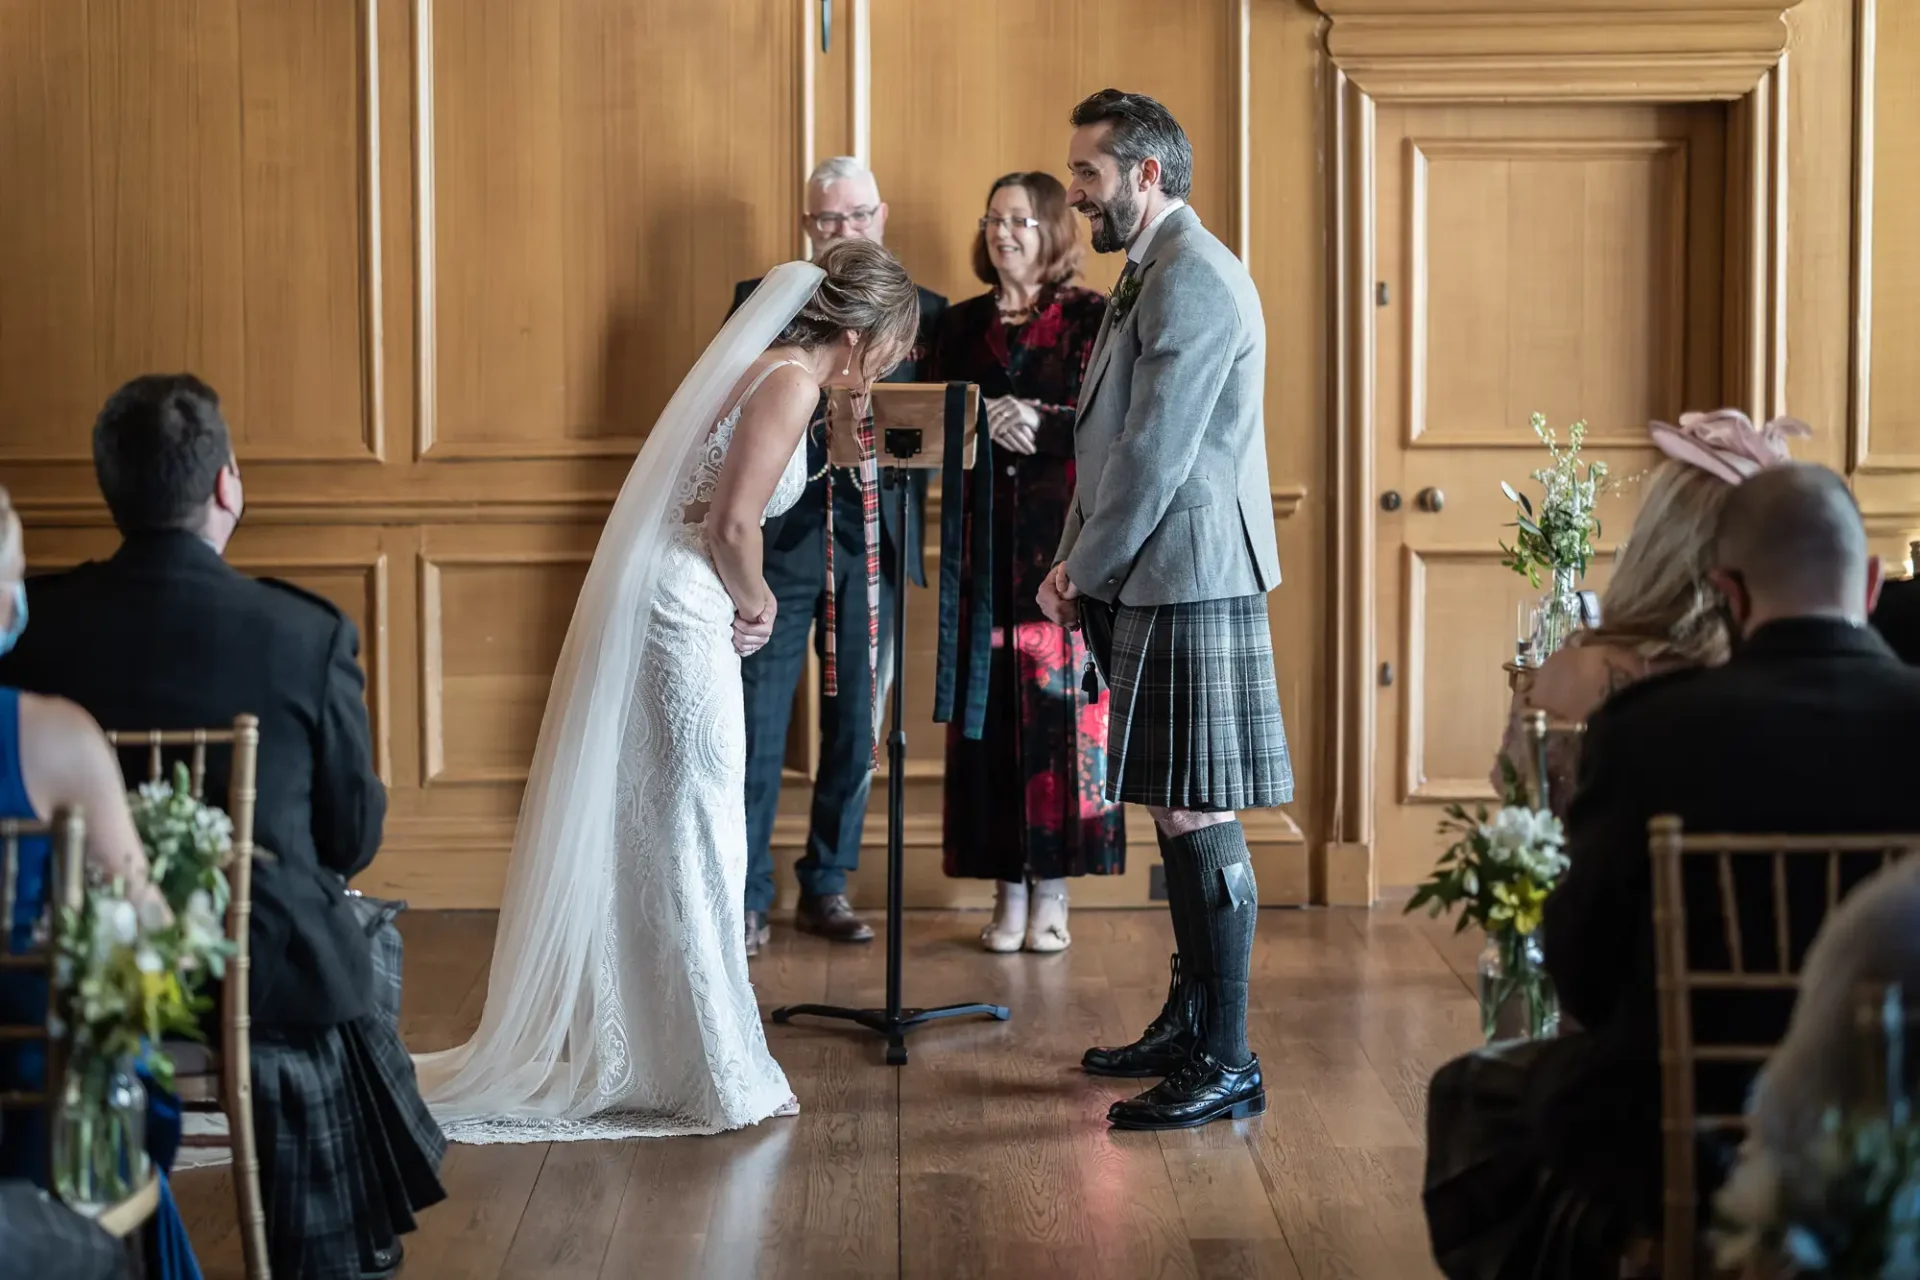 Bride and groom performing a handfasting ceremony in front of an officiant and guests in a wood-paneled room, groom wearing a kilt.